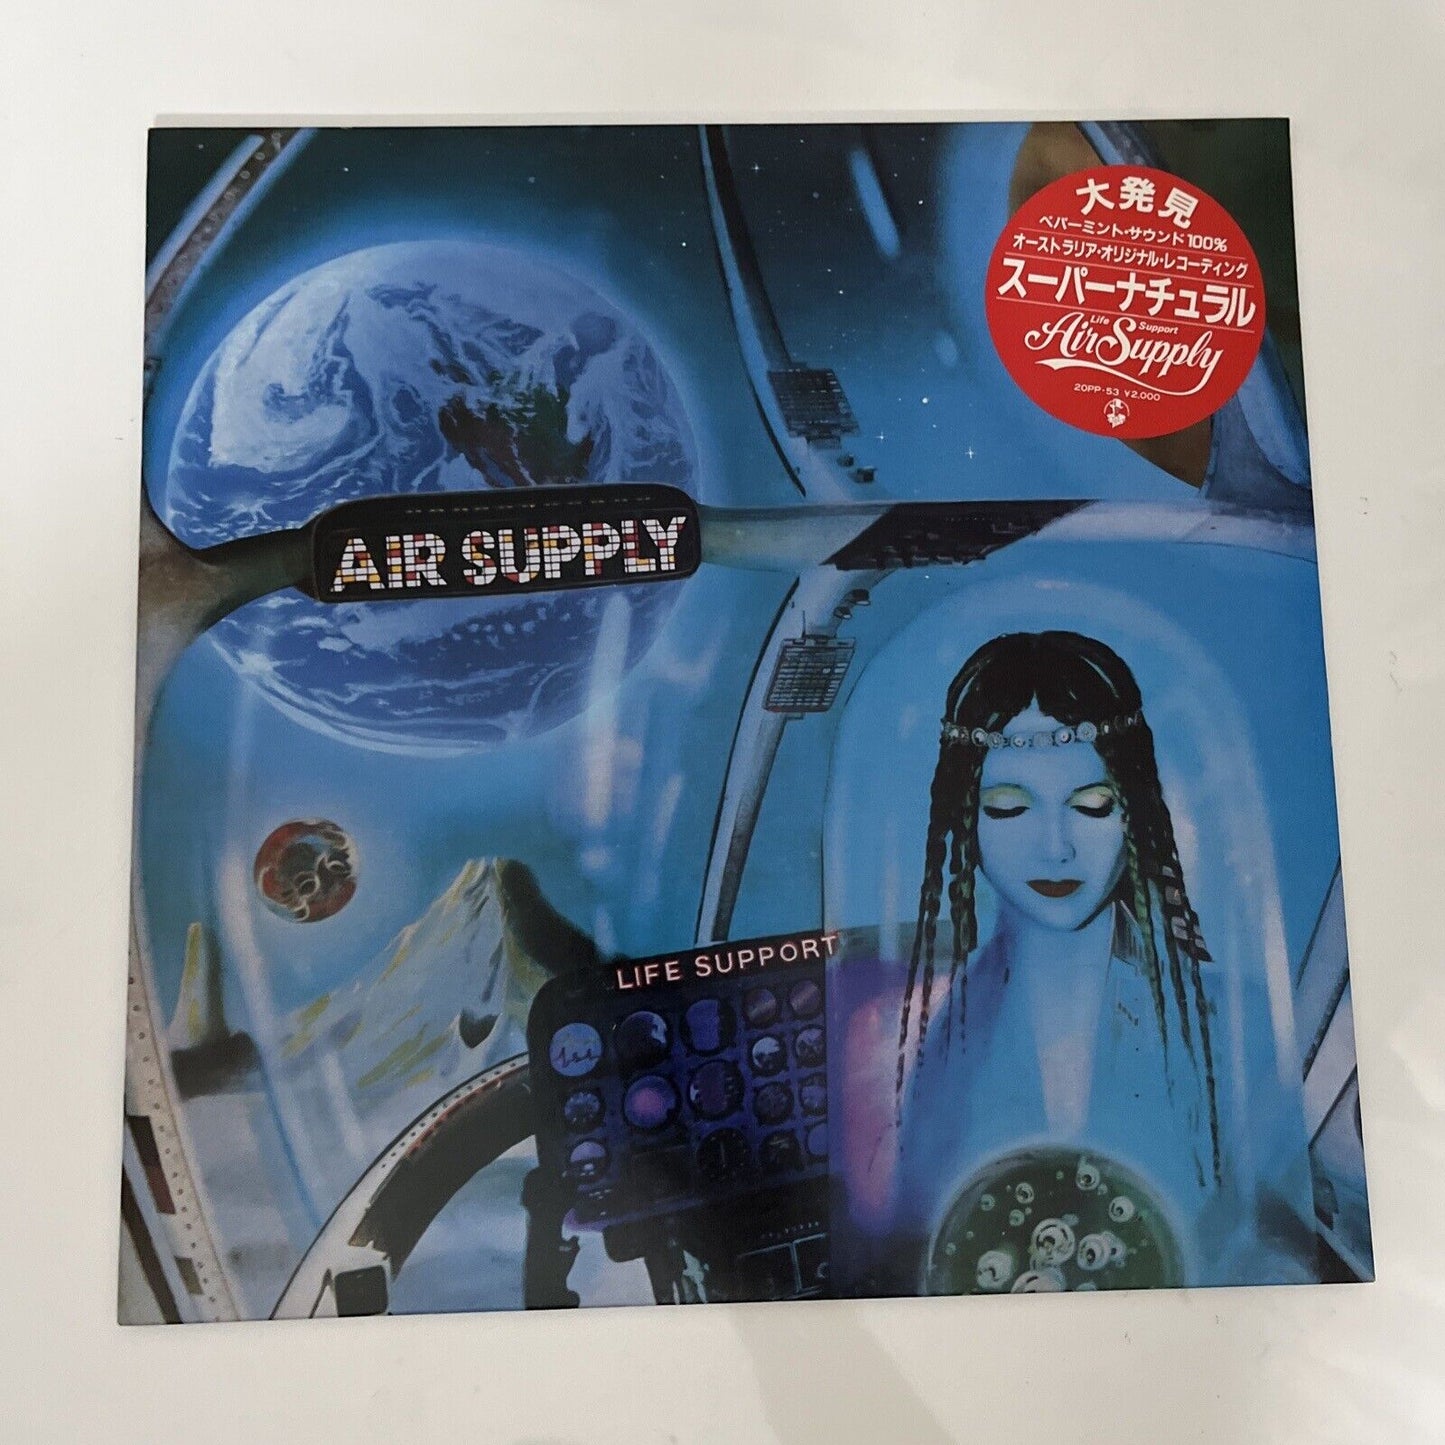 Air Supply - Life Support LP 1983 Vinyl Record 20PP-53